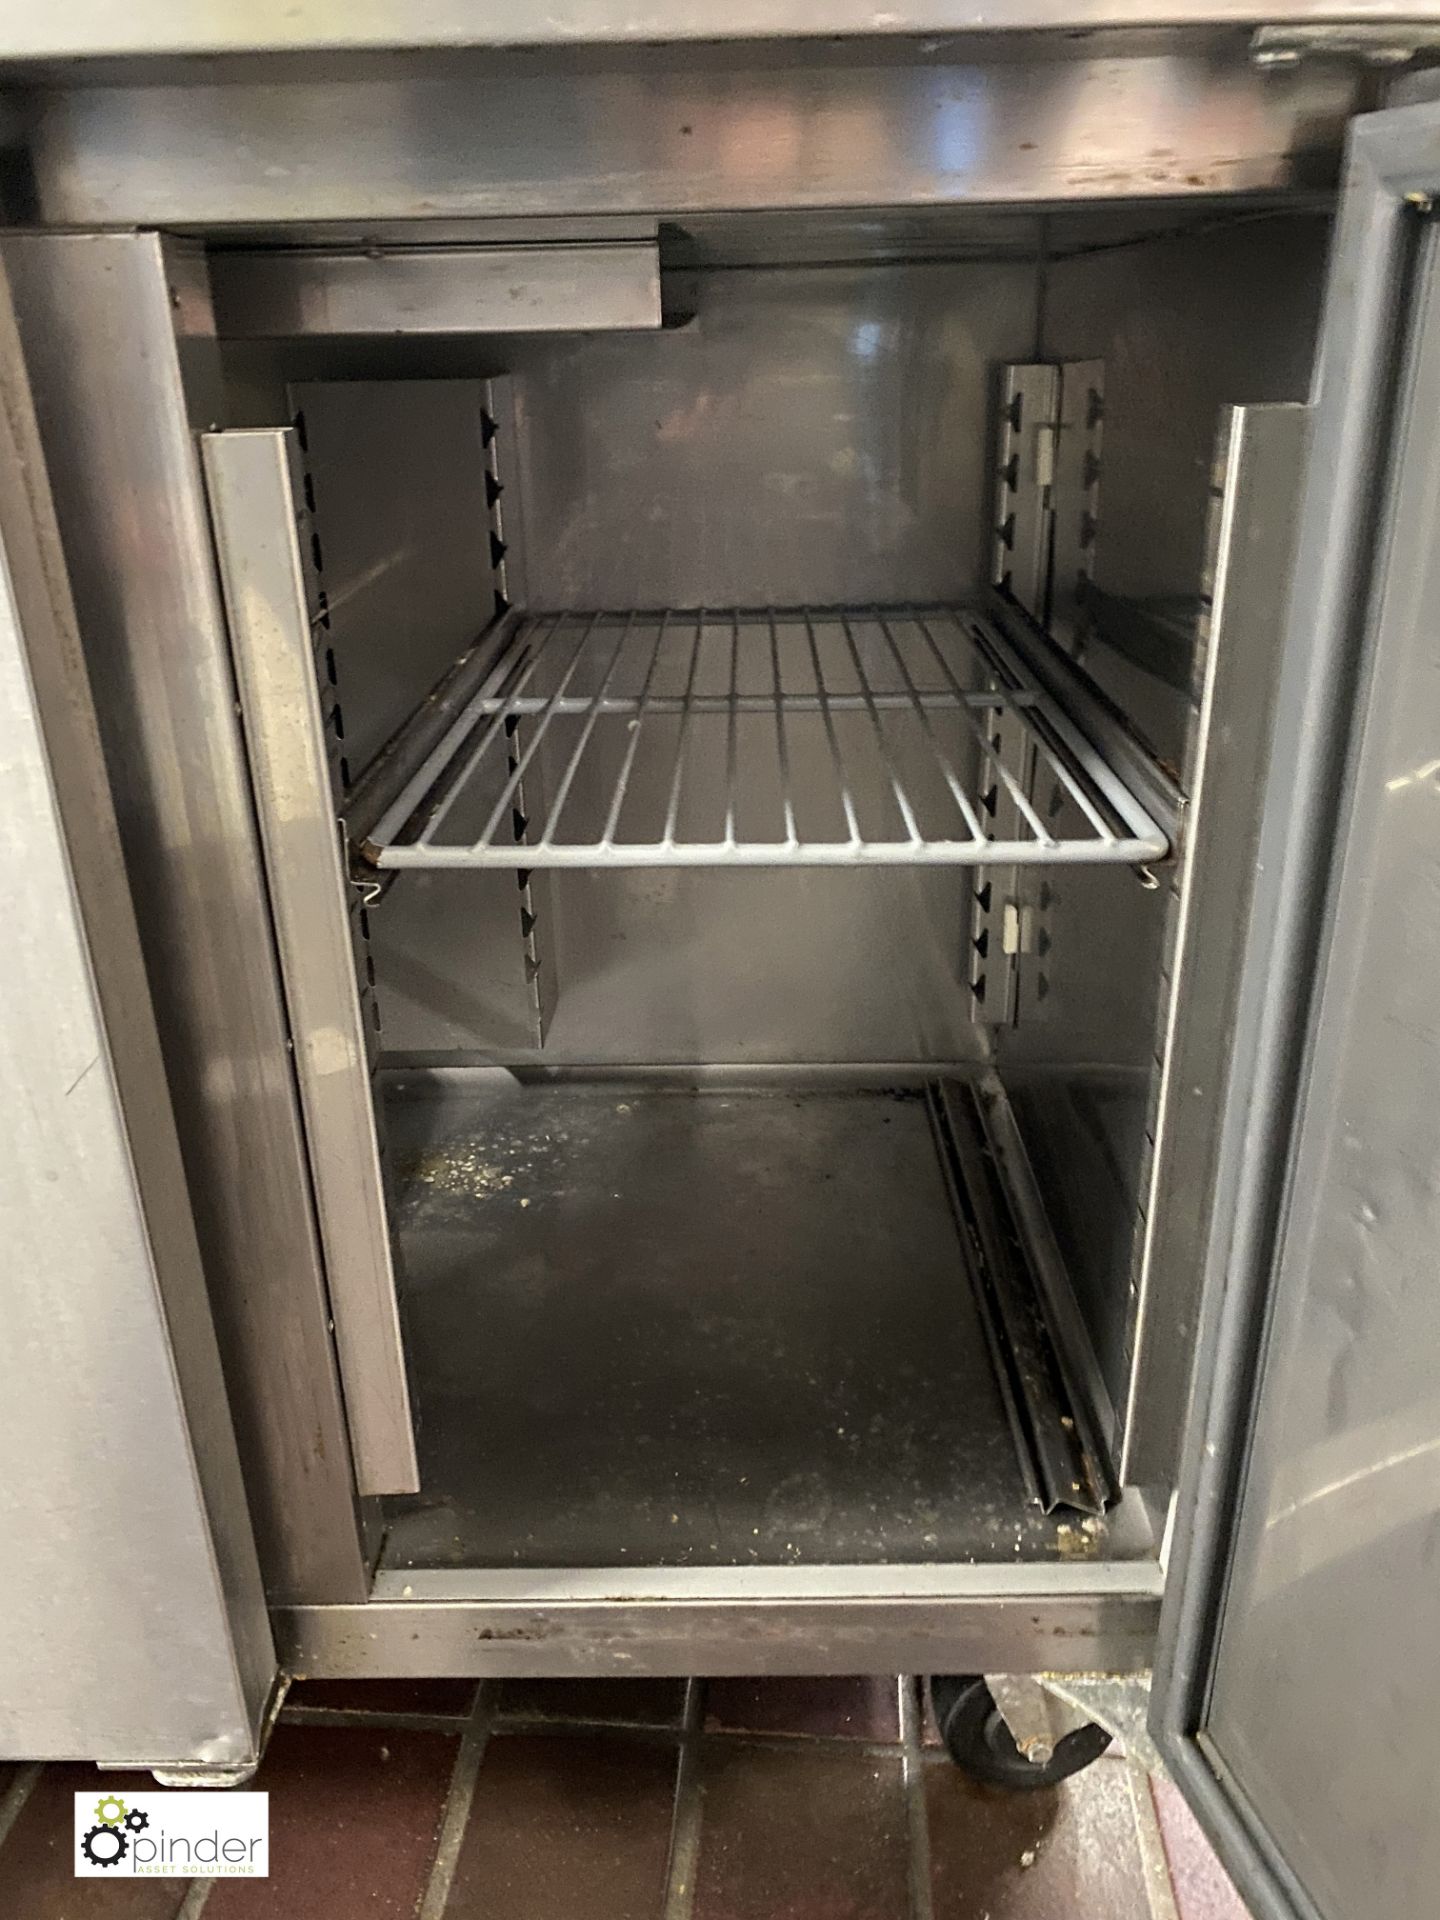 Williams stainless steel mobile triple door Chilled Counter, 240volts, 1900mm x 650mm x 860mm, - Image 4 of 5